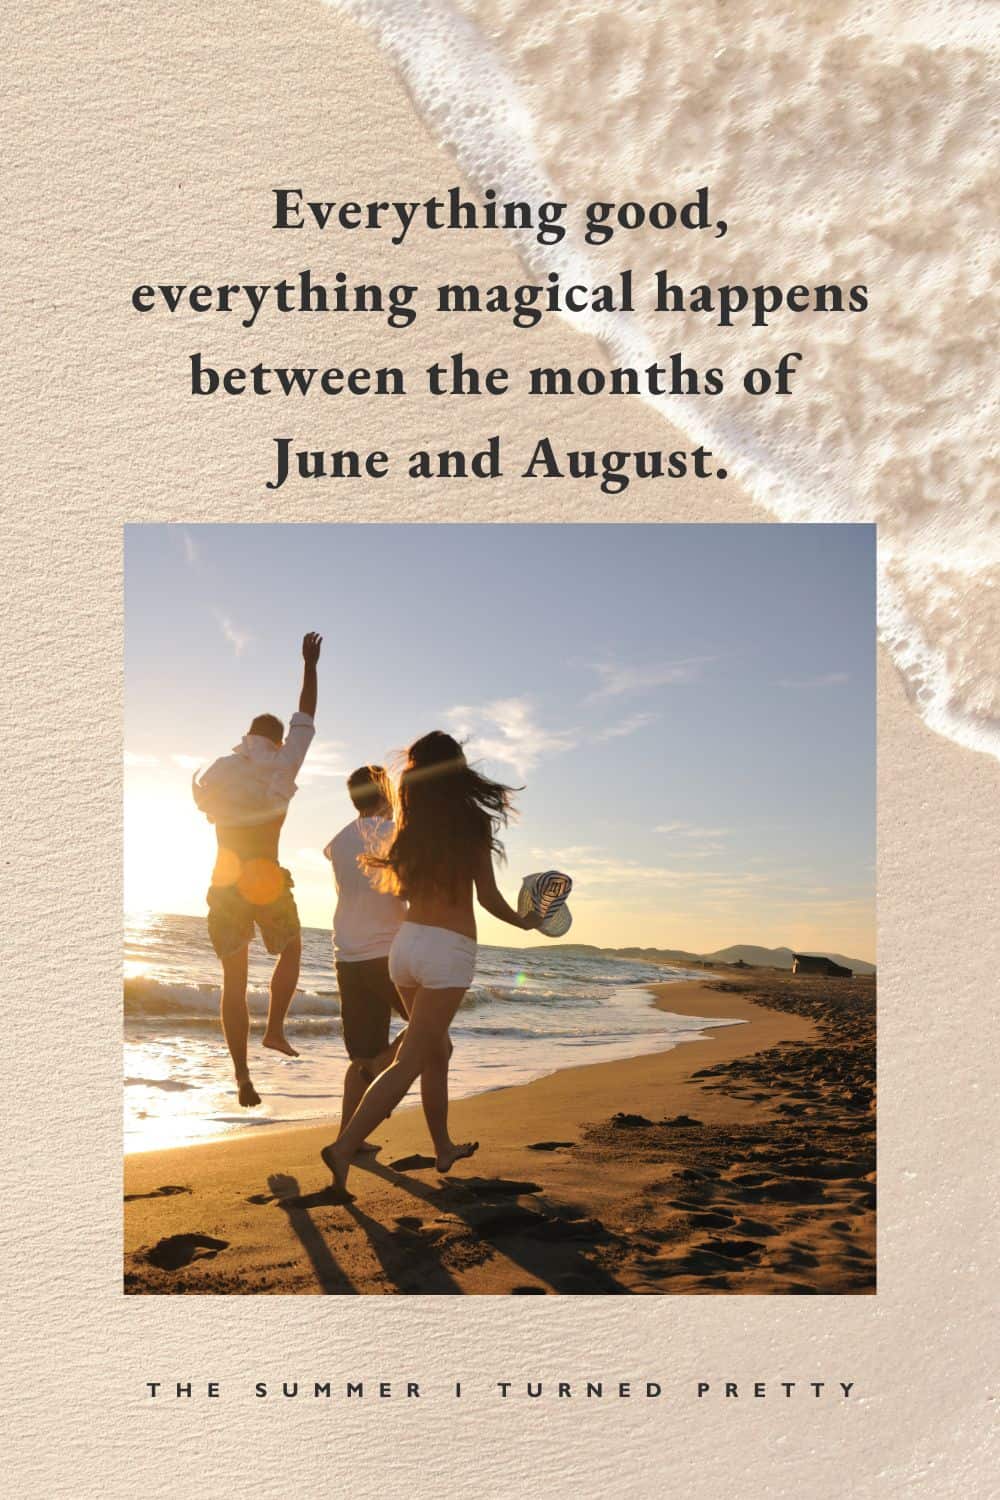 “Everything good, everything magical happens between the months of June and August.” – Jenny Han, The Summer I Turned Pretty